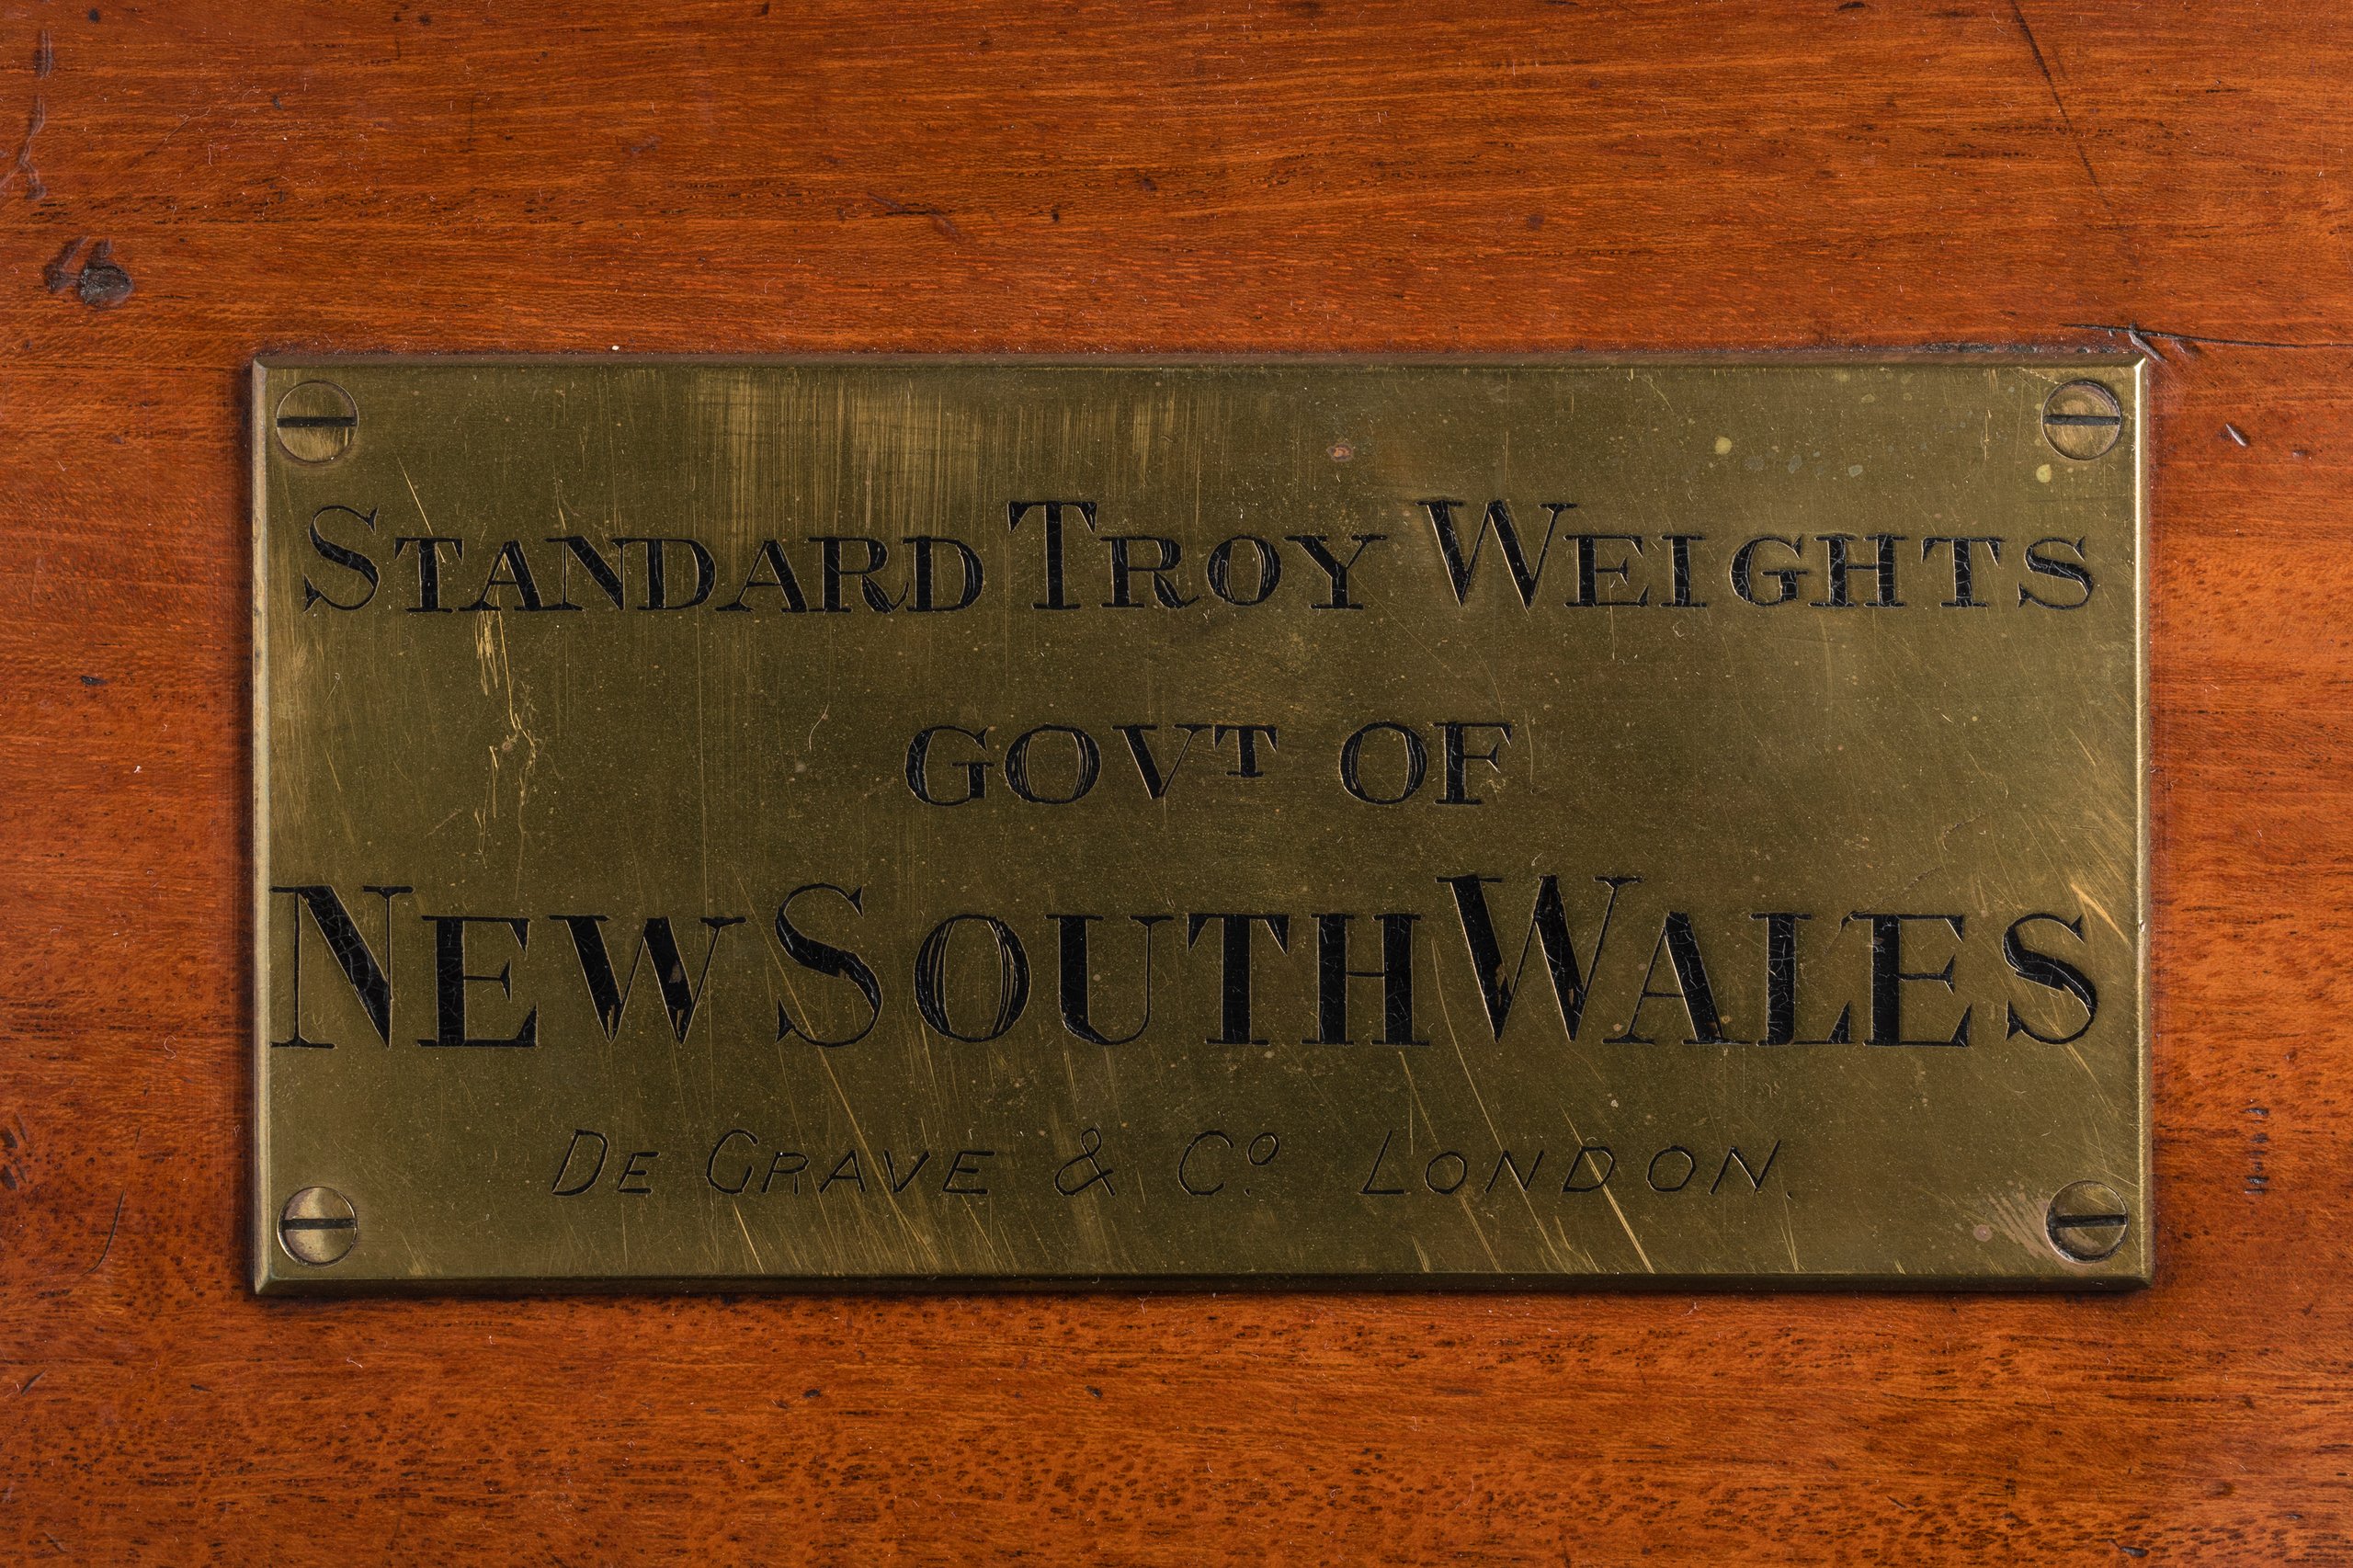 Troy weight standard sets by De Grave and Company used by the Government of New South Wales